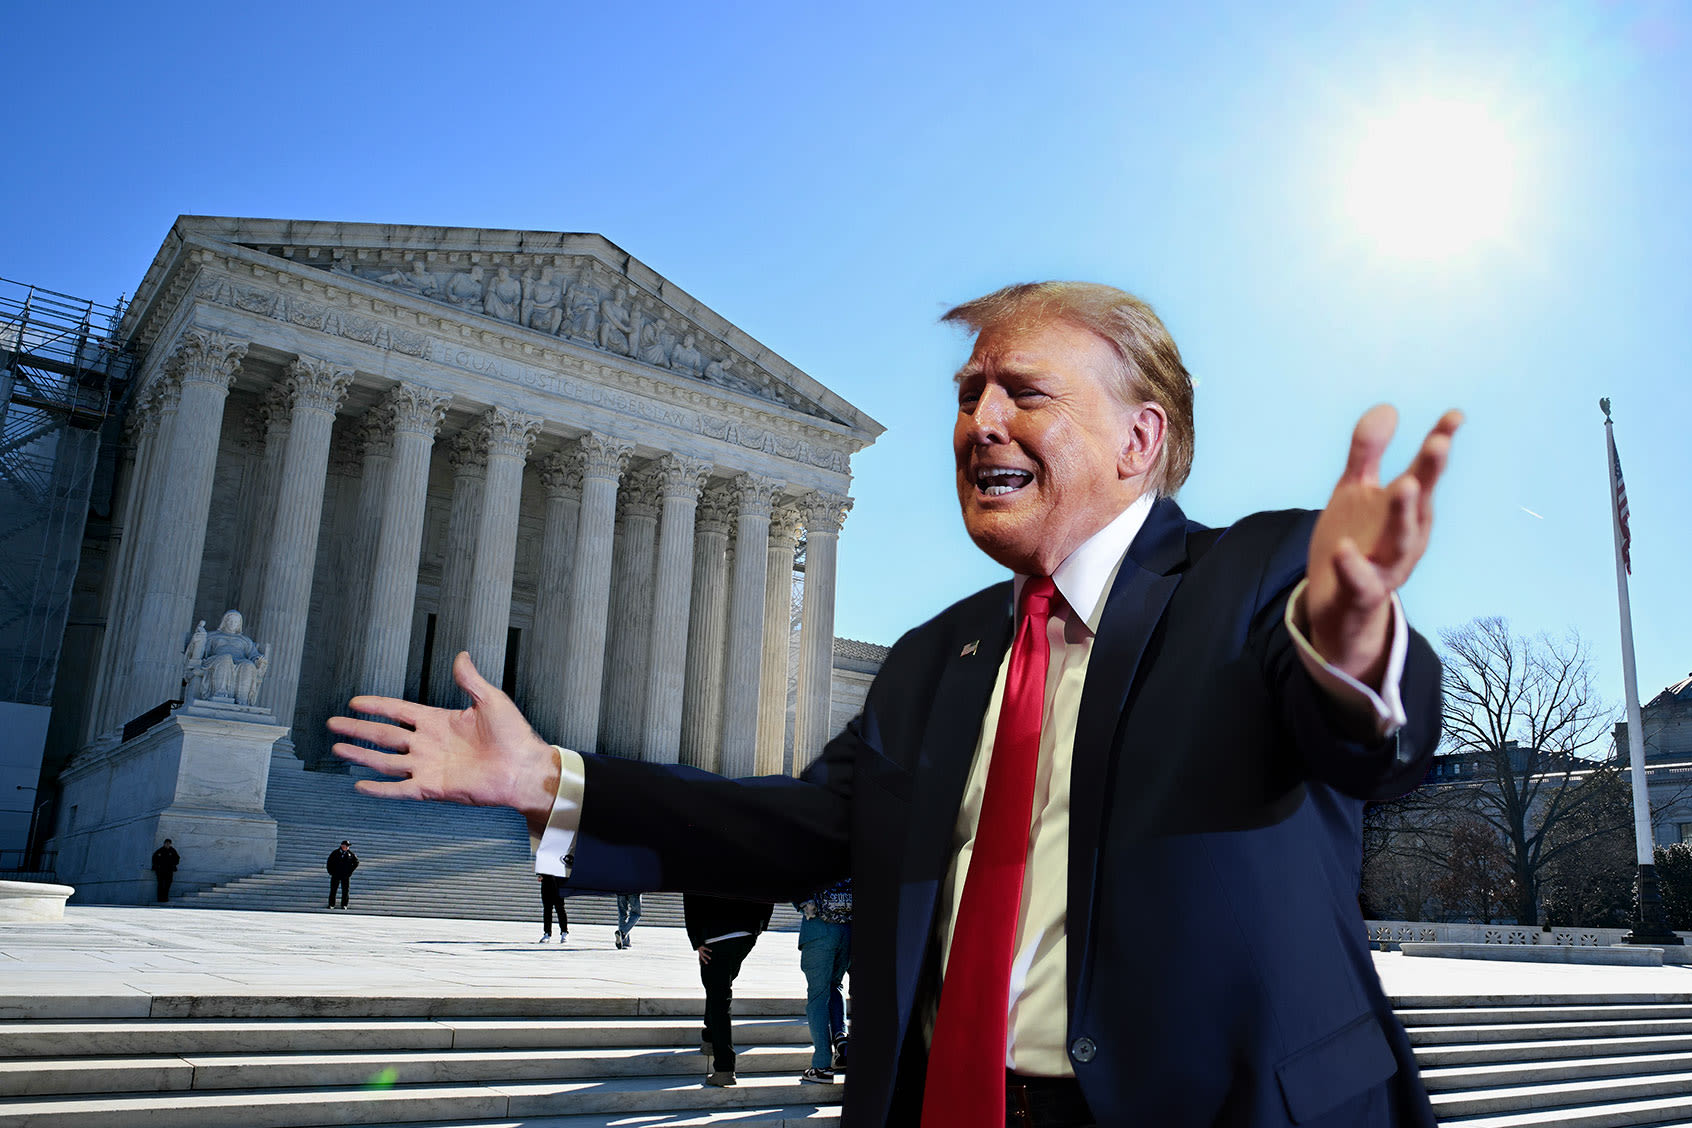 "I don't see any of that": Experts pour cold water on Trump's hope that Supreme Court will save him